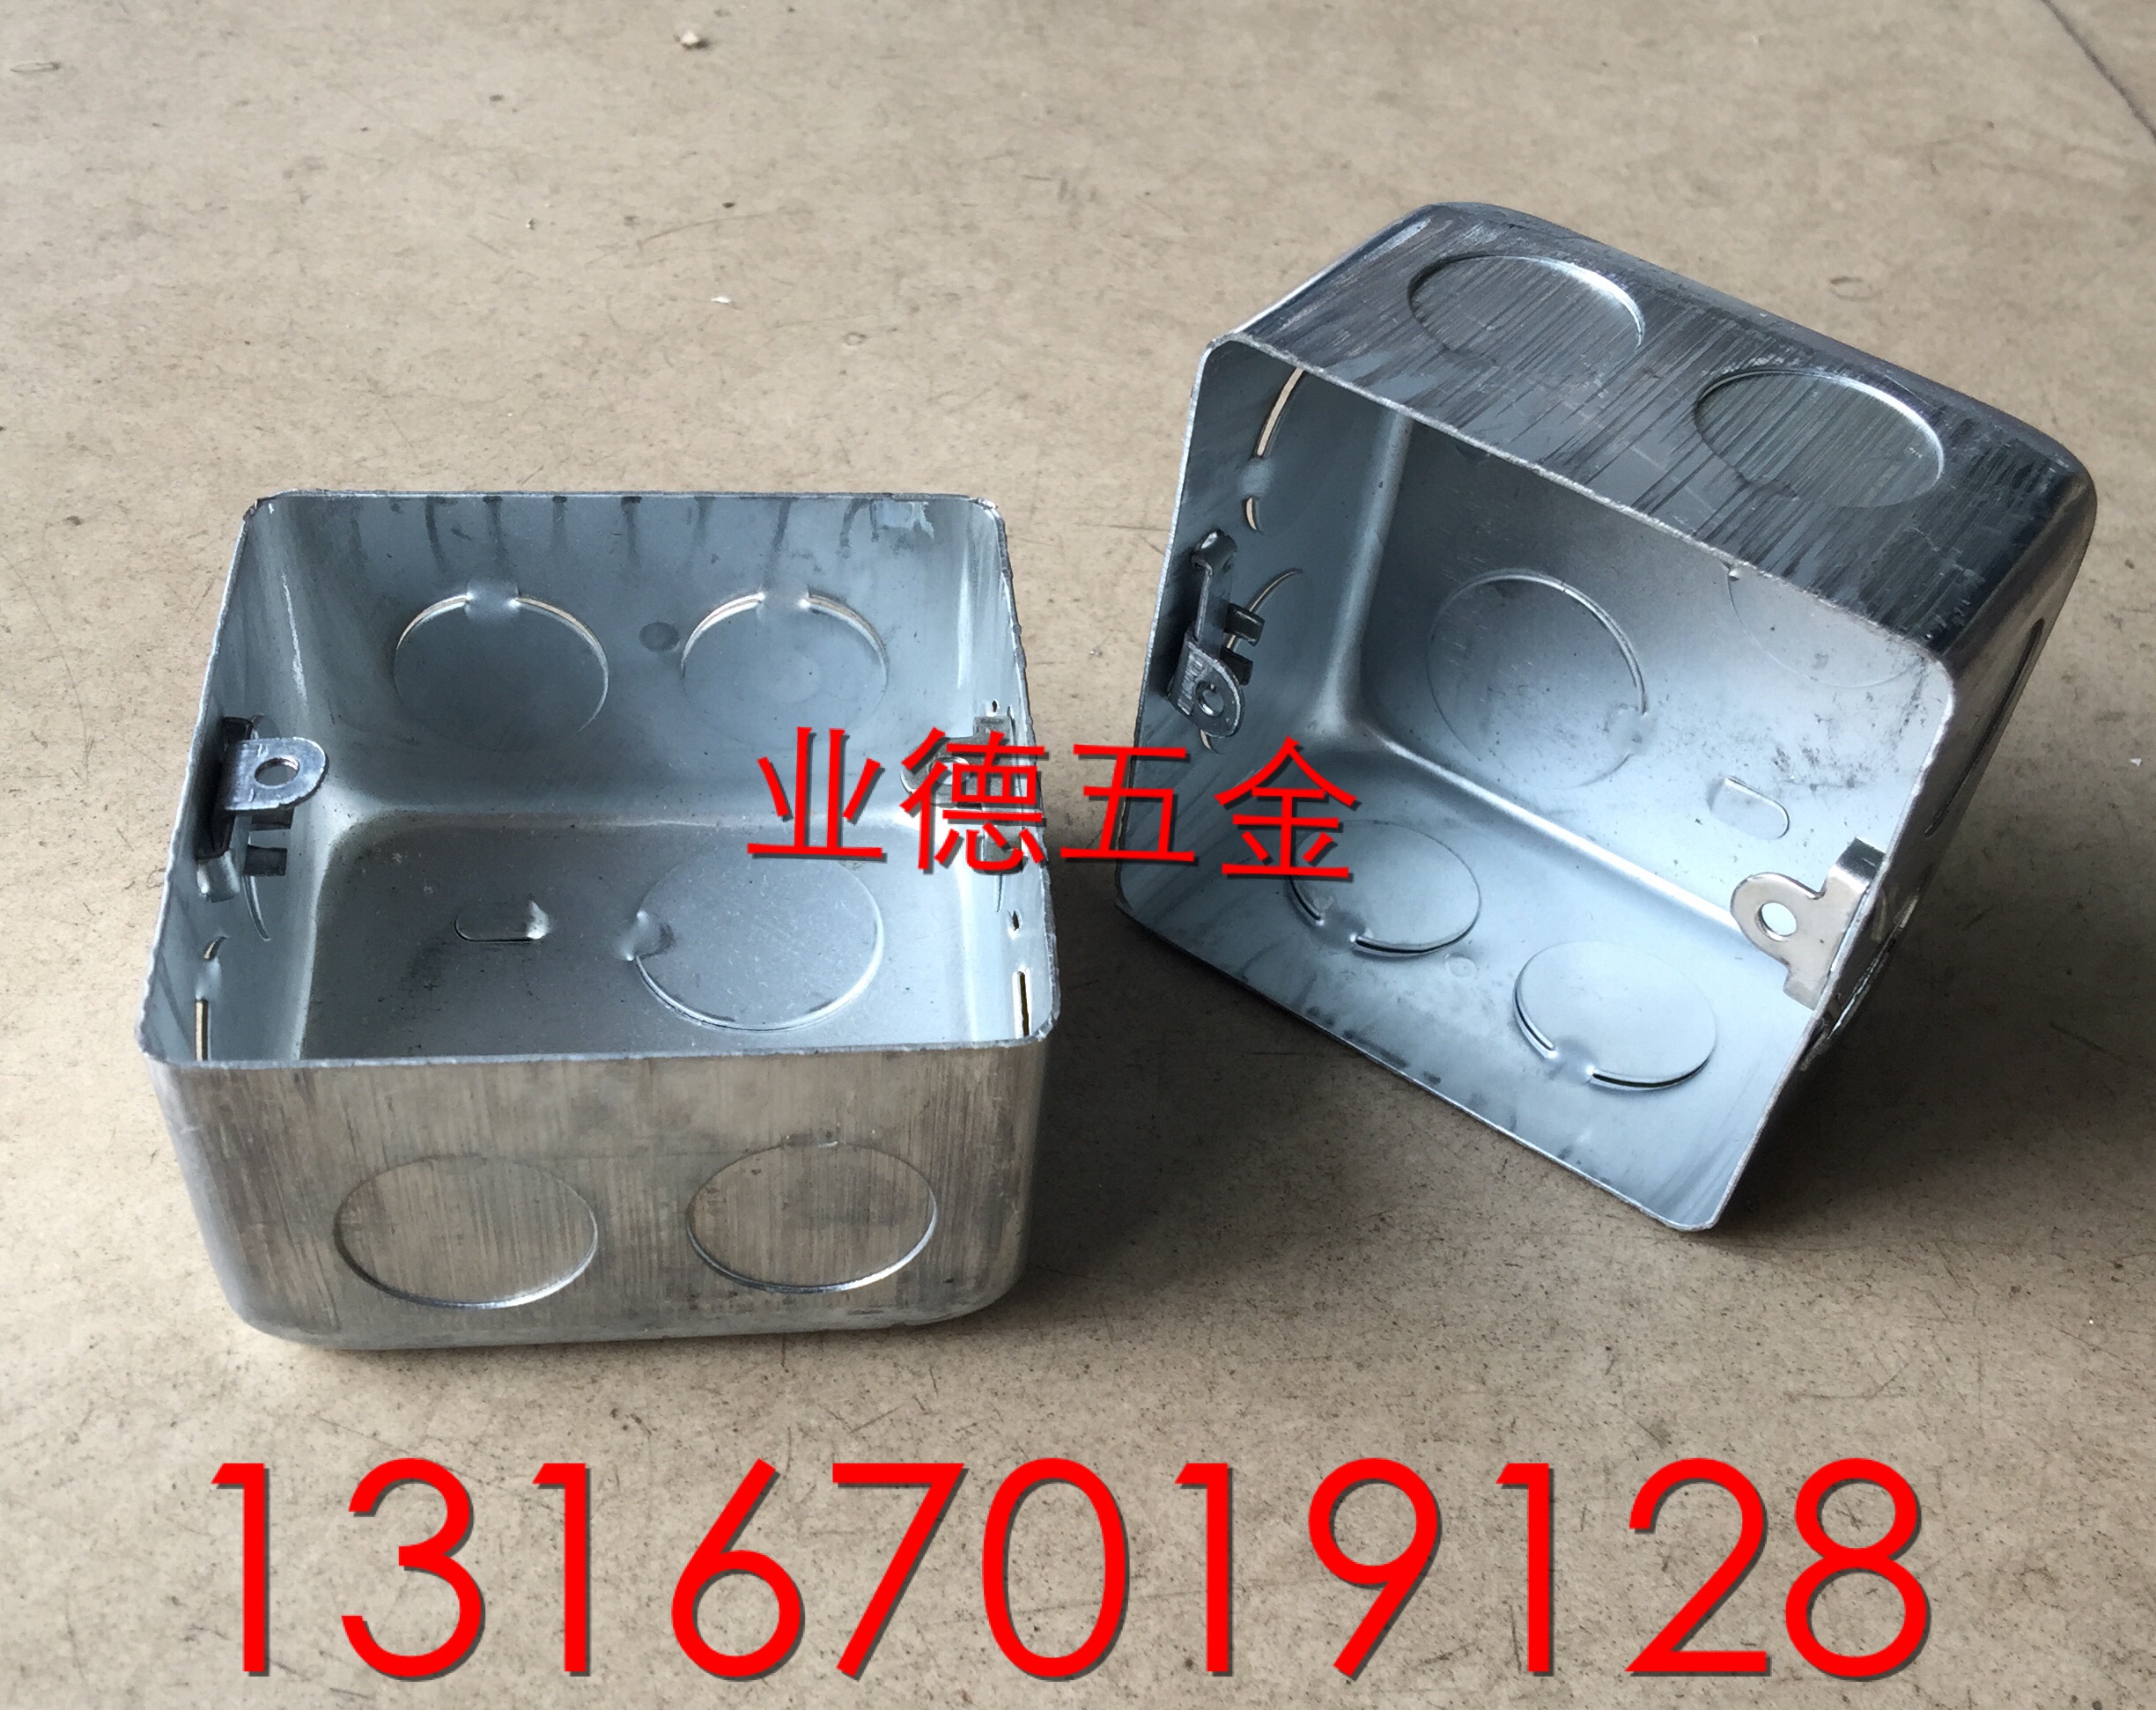 86 type iron junction box 86h50 iron square box metal stretching box steel junction box switch box concealed bottom box